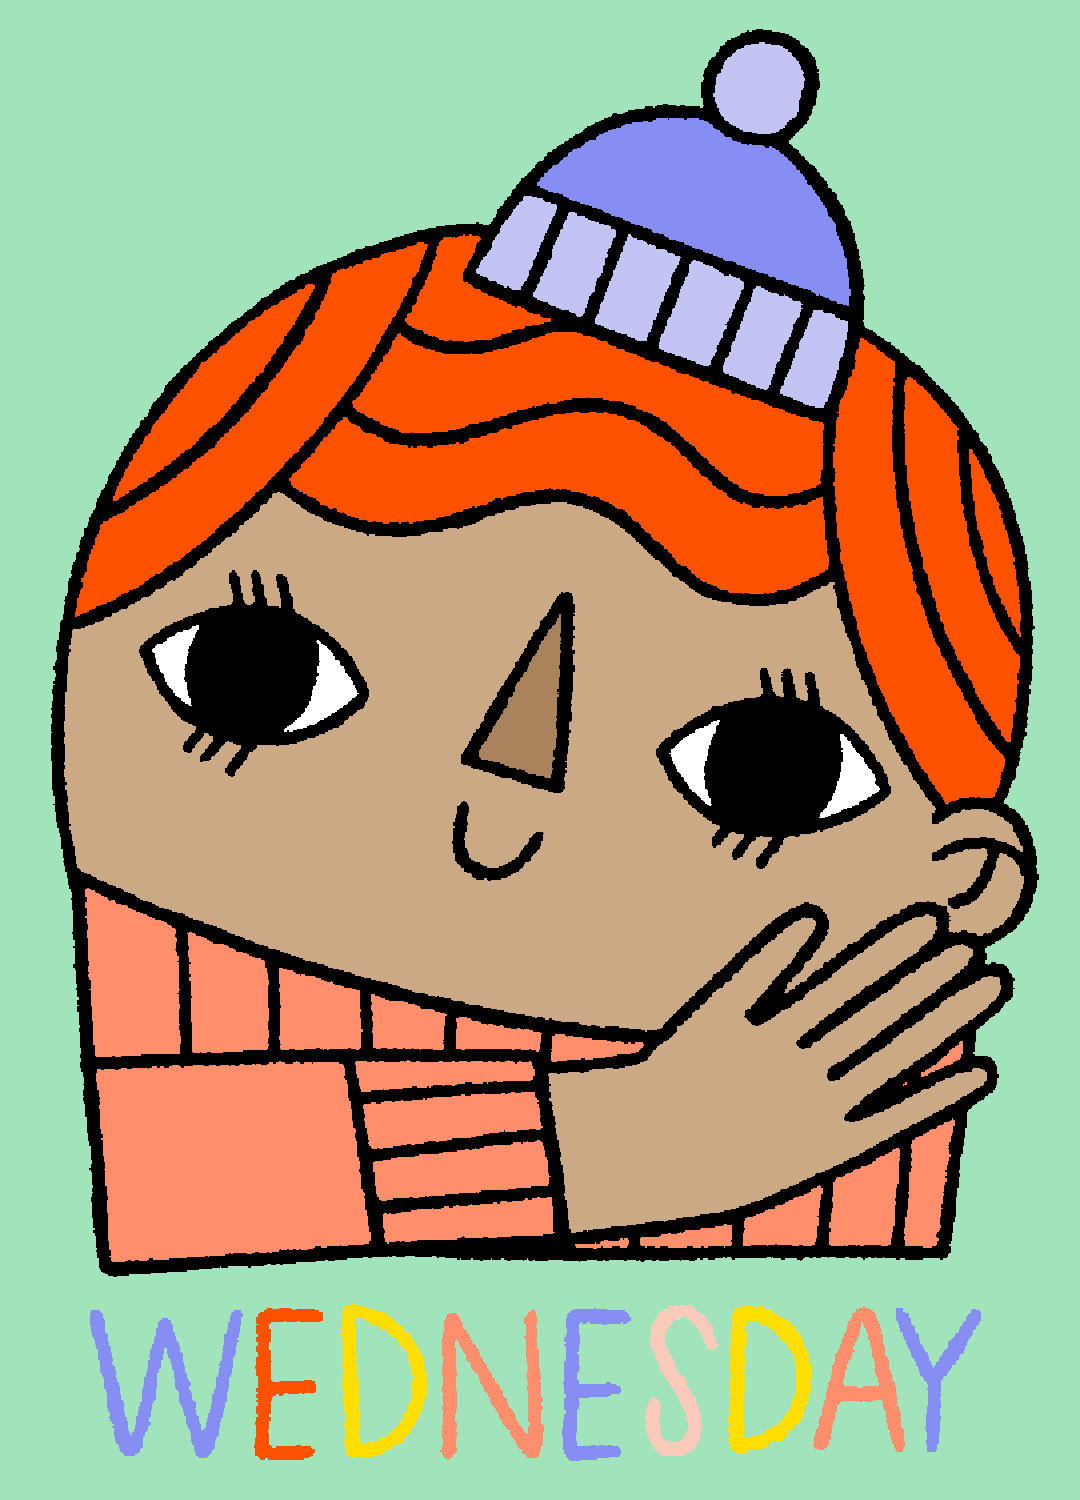 Kawaii gif. A red-haired person wearing a tiny blue stocking cap smiles and blinks at us. Text: "Wednesday."